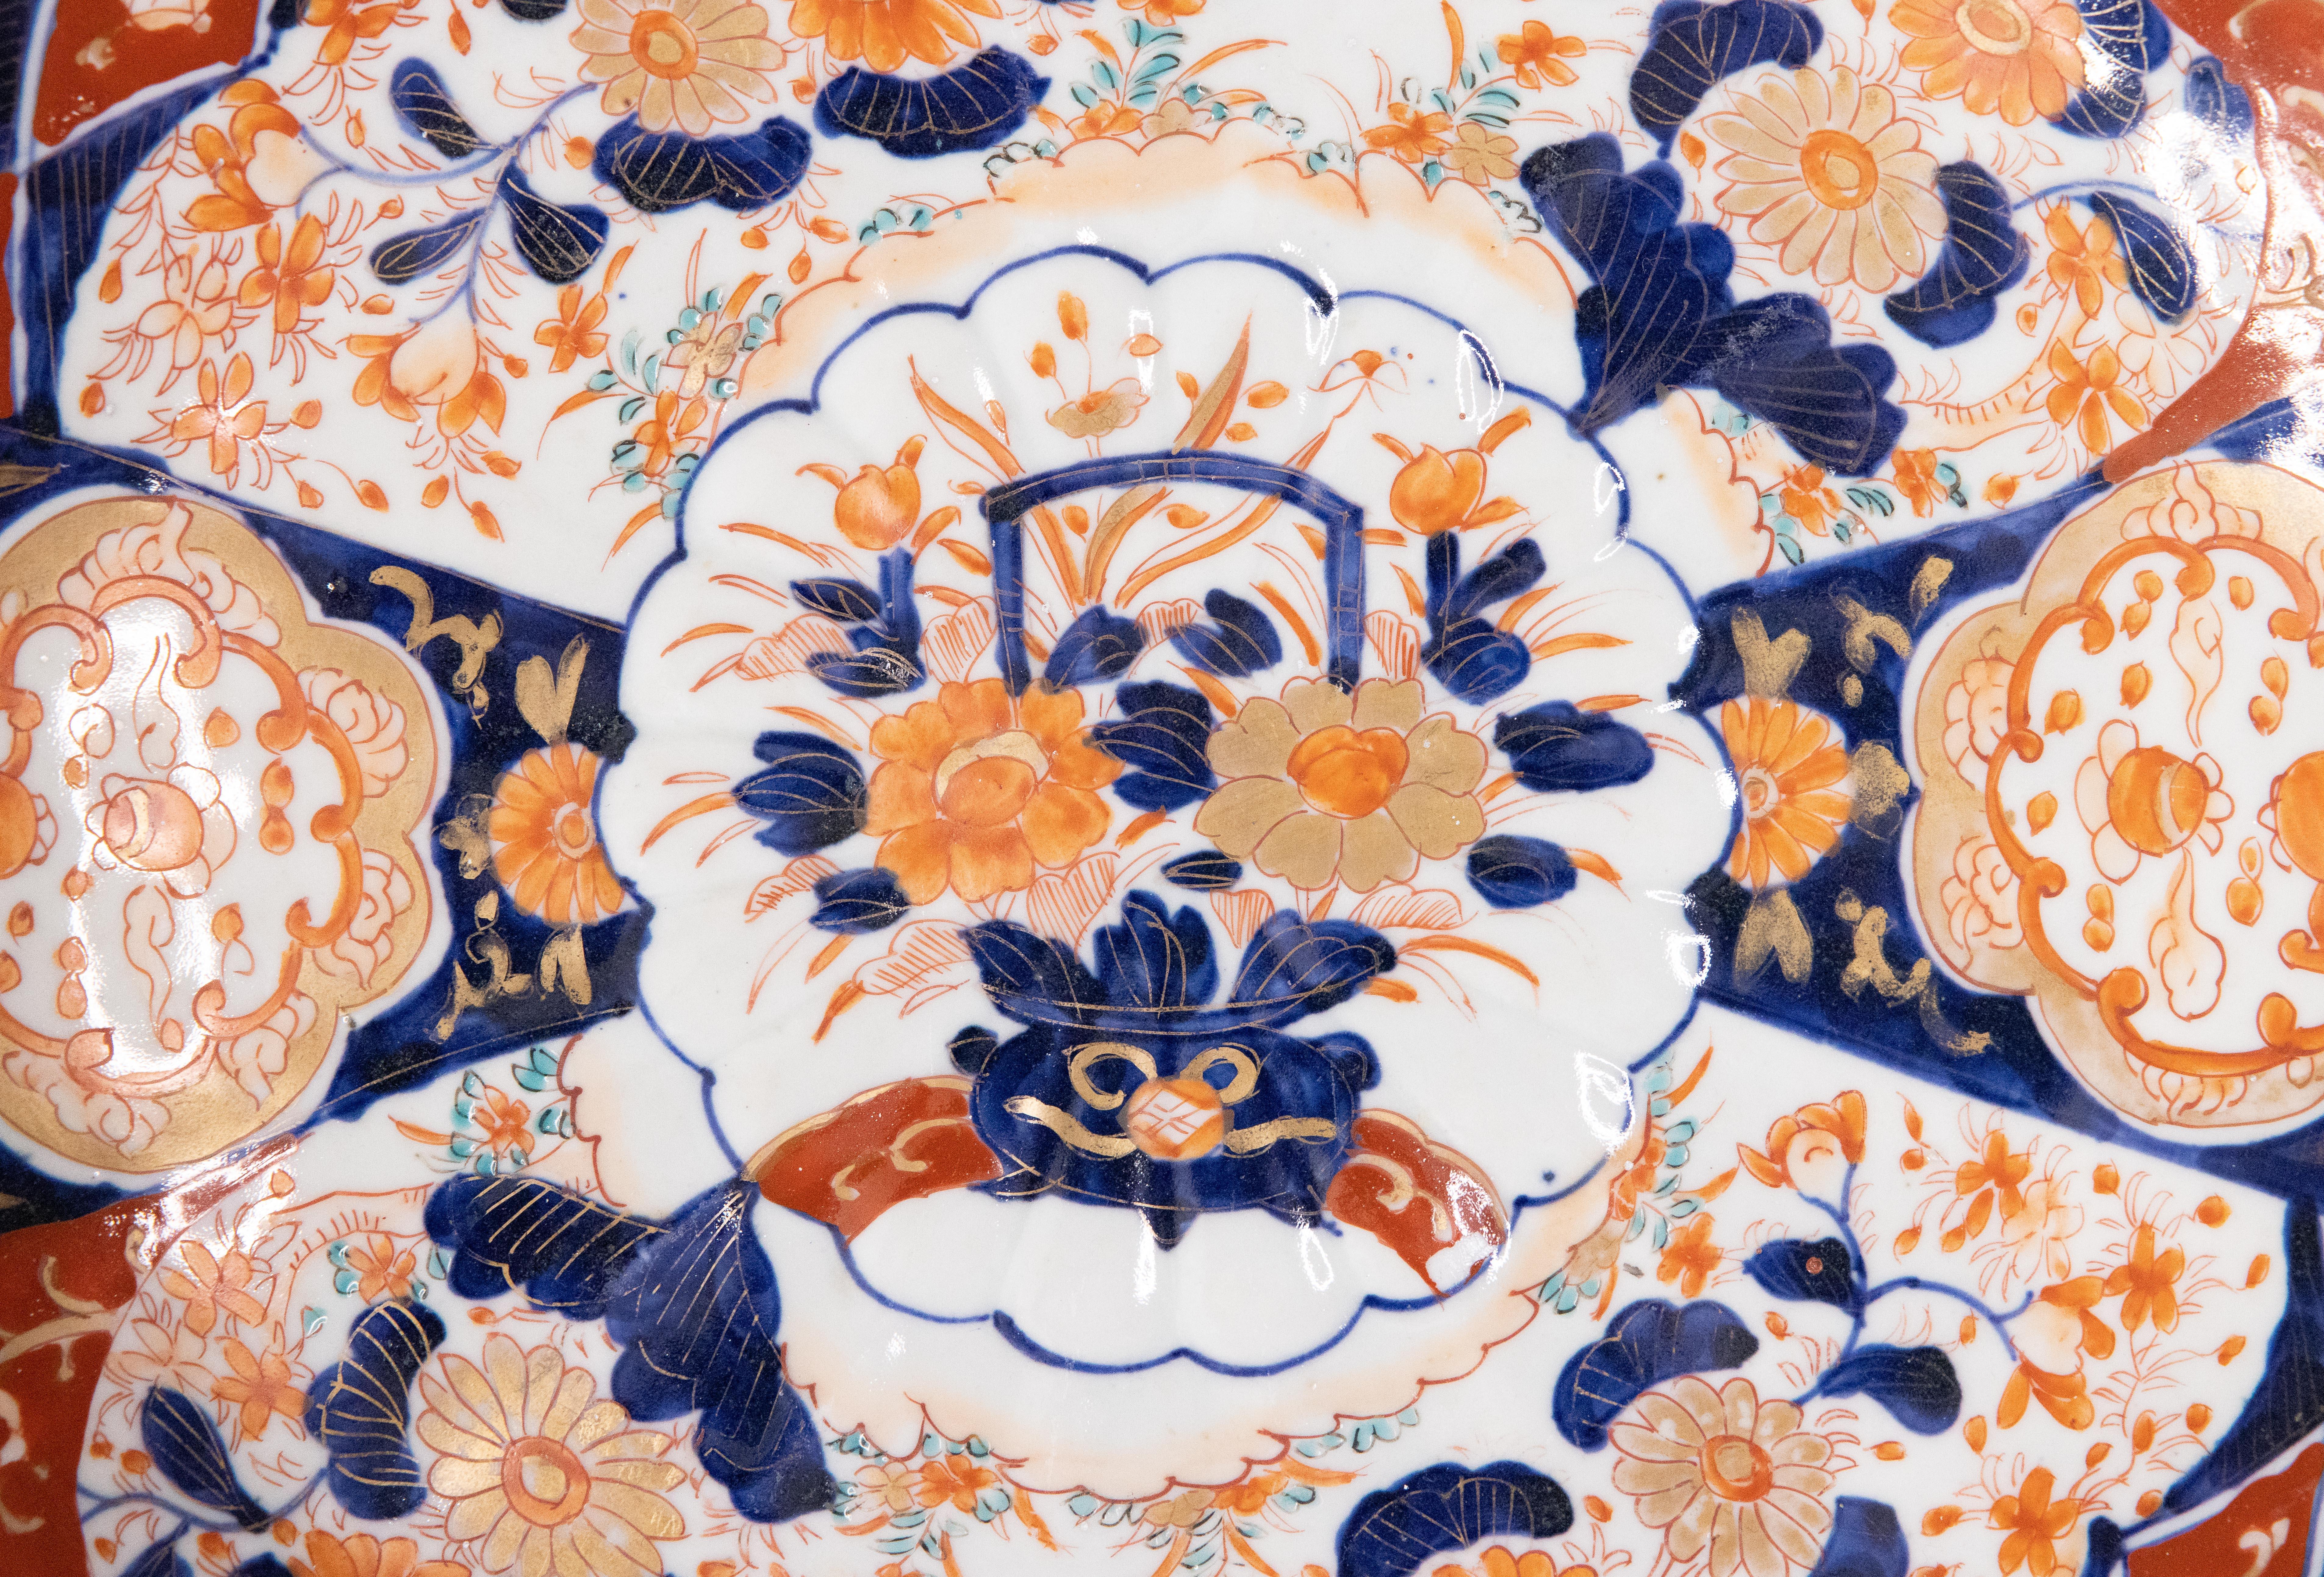 A gorgeous 19th-century Japanese Imari porcelain charger with a hand painted floral design in the traditional Imari colors with a beautiful pop of turquoise. This fine large plate has lovely scalloped edges and is quite heavy, weighing over 3 lbs.